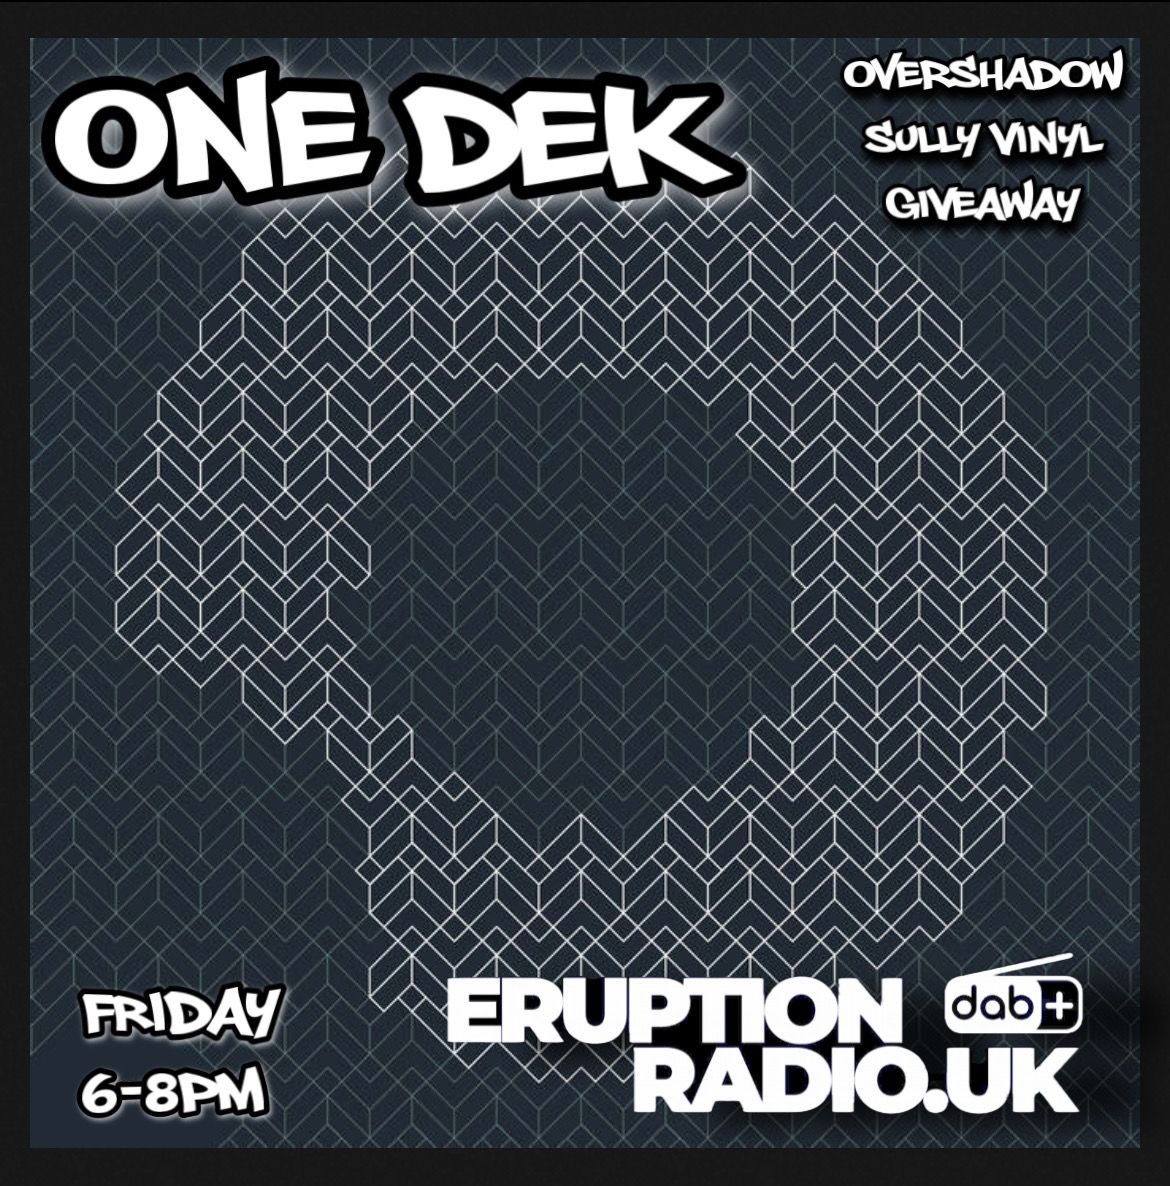 This Friday from 6-8pm only on @eruptionradiouk I have a copy of the almighty Over/Shadow track 5ives/Sliding by Sully to give away on my show, so get locked!!
😊🙌🏼🔥🌋
#RealRadio
#youhavetobeinittowinit